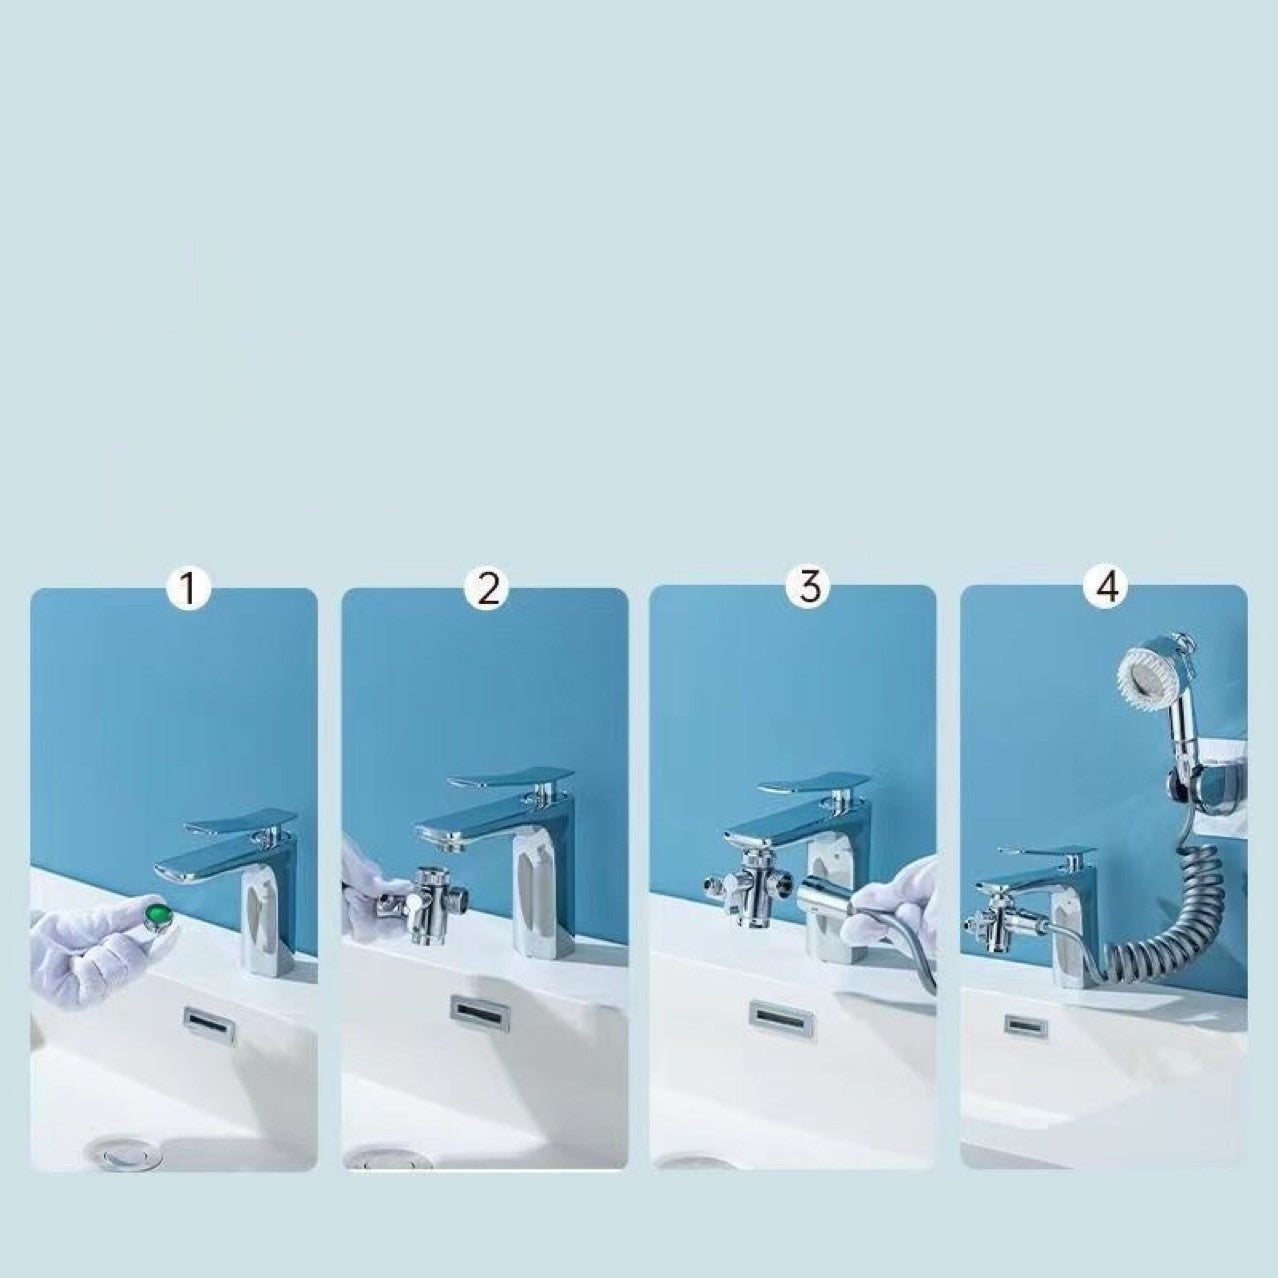 Multifunctional Faucet with Hand Shower